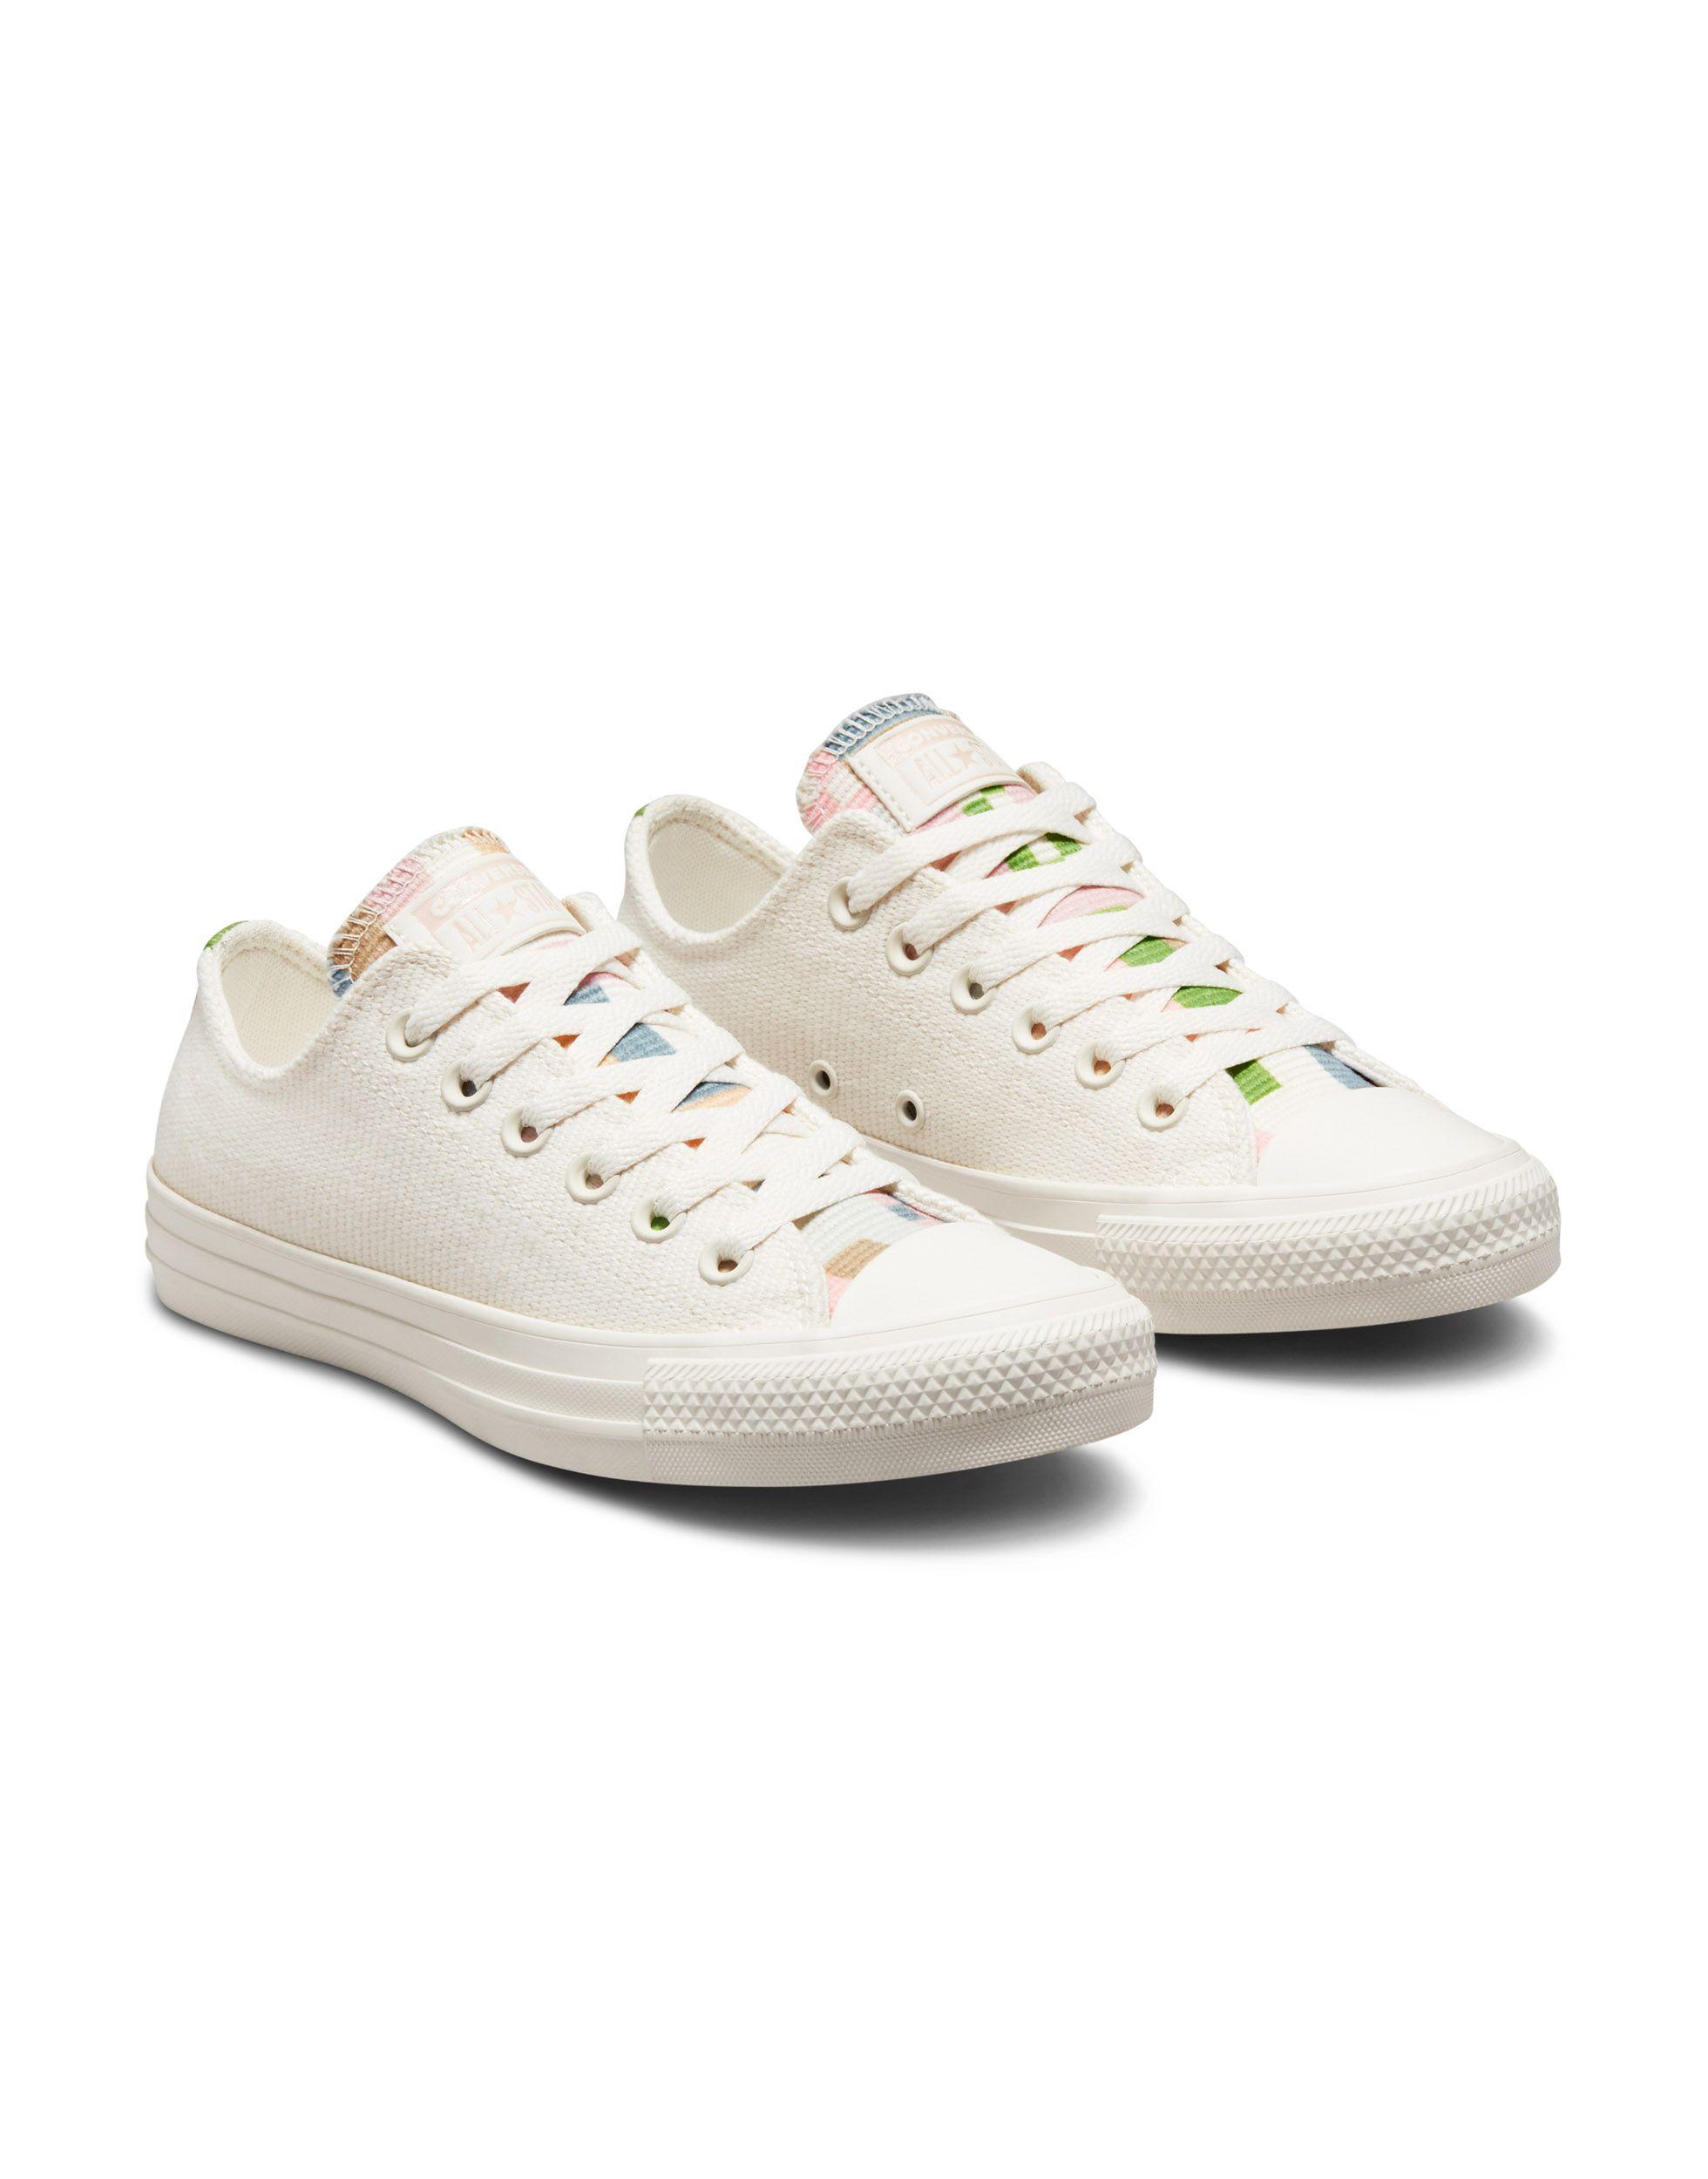 Converse Chuck Taylor All Star Ox Crafted Folk Canvas Sneakers in White |  Lyst